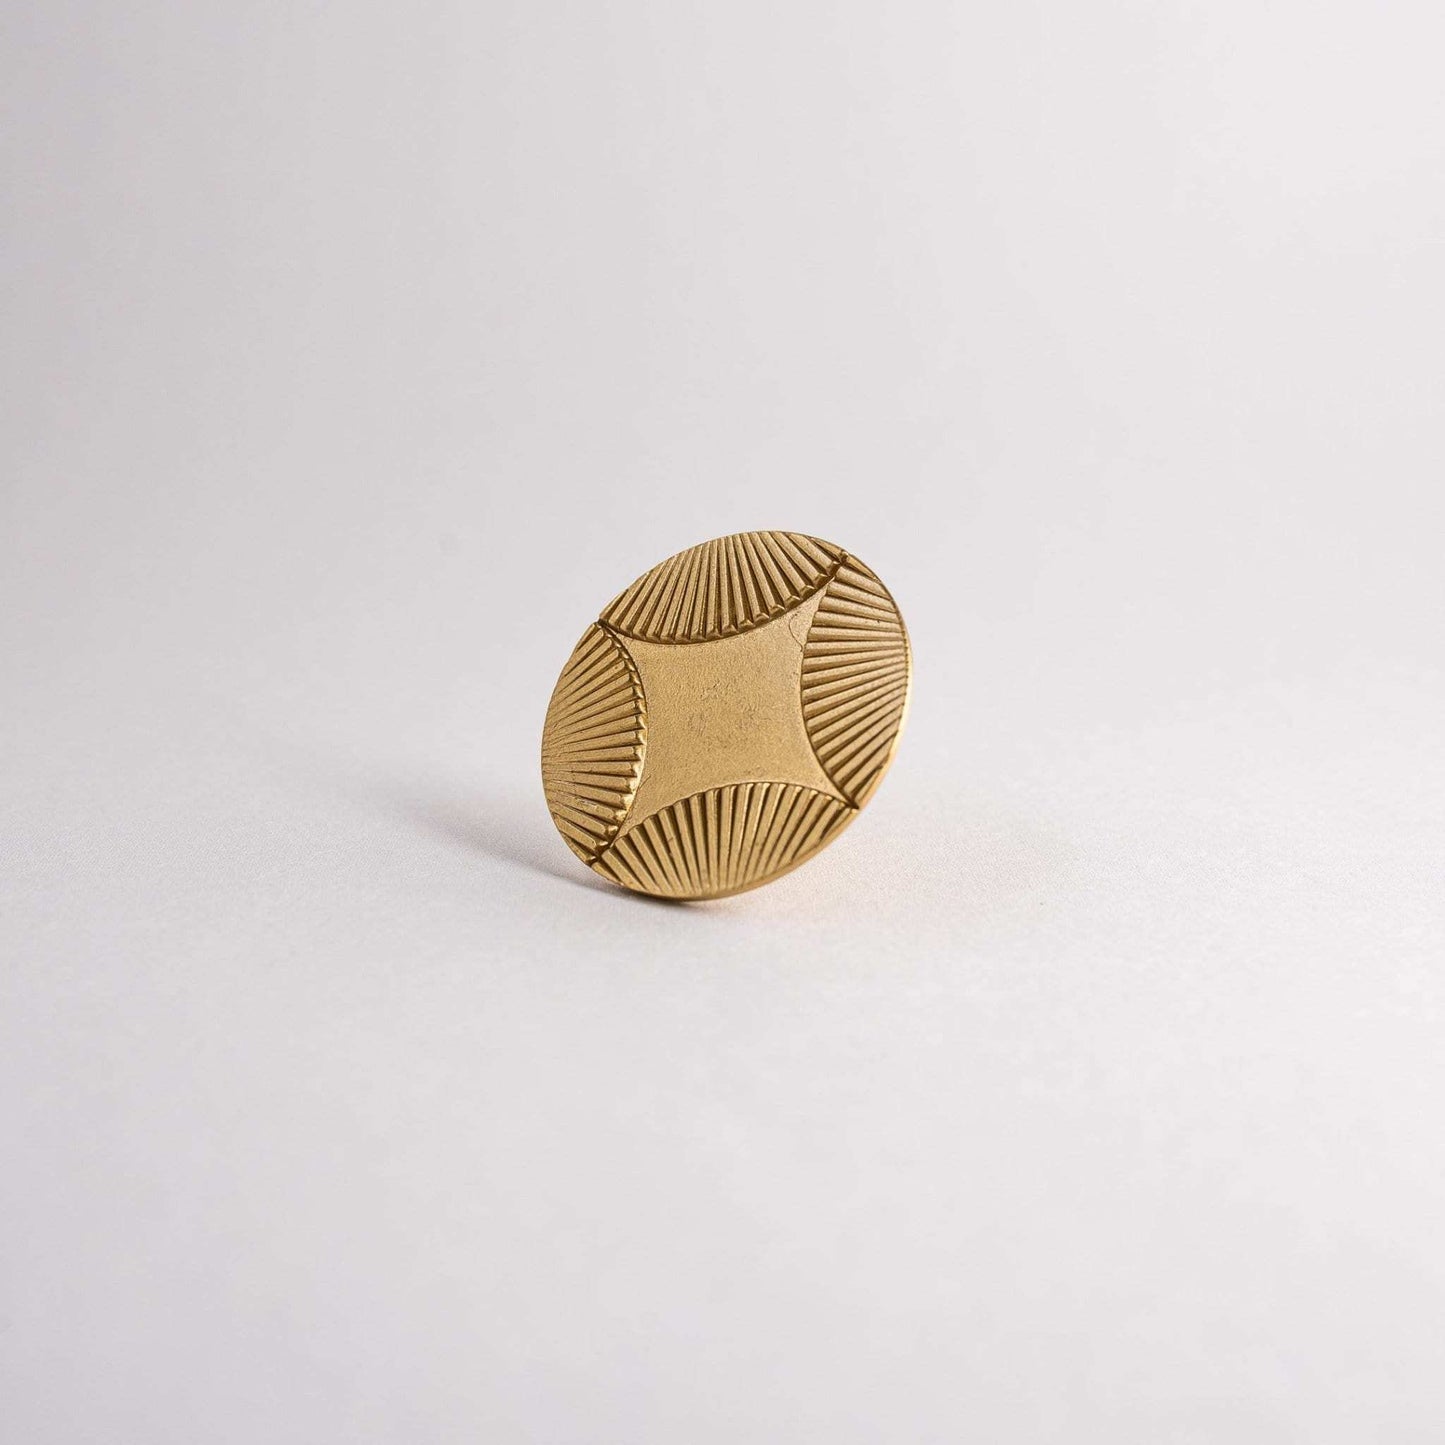 Star, Solid Brass Cabinet Knob


Our Star Knob is a distinctive take on the traditional cabinet knob. A perfect design to adorn transitional cabinet doors and drawers.



This product is not avaiKnobStar, Solid Brass Cabinet Knob